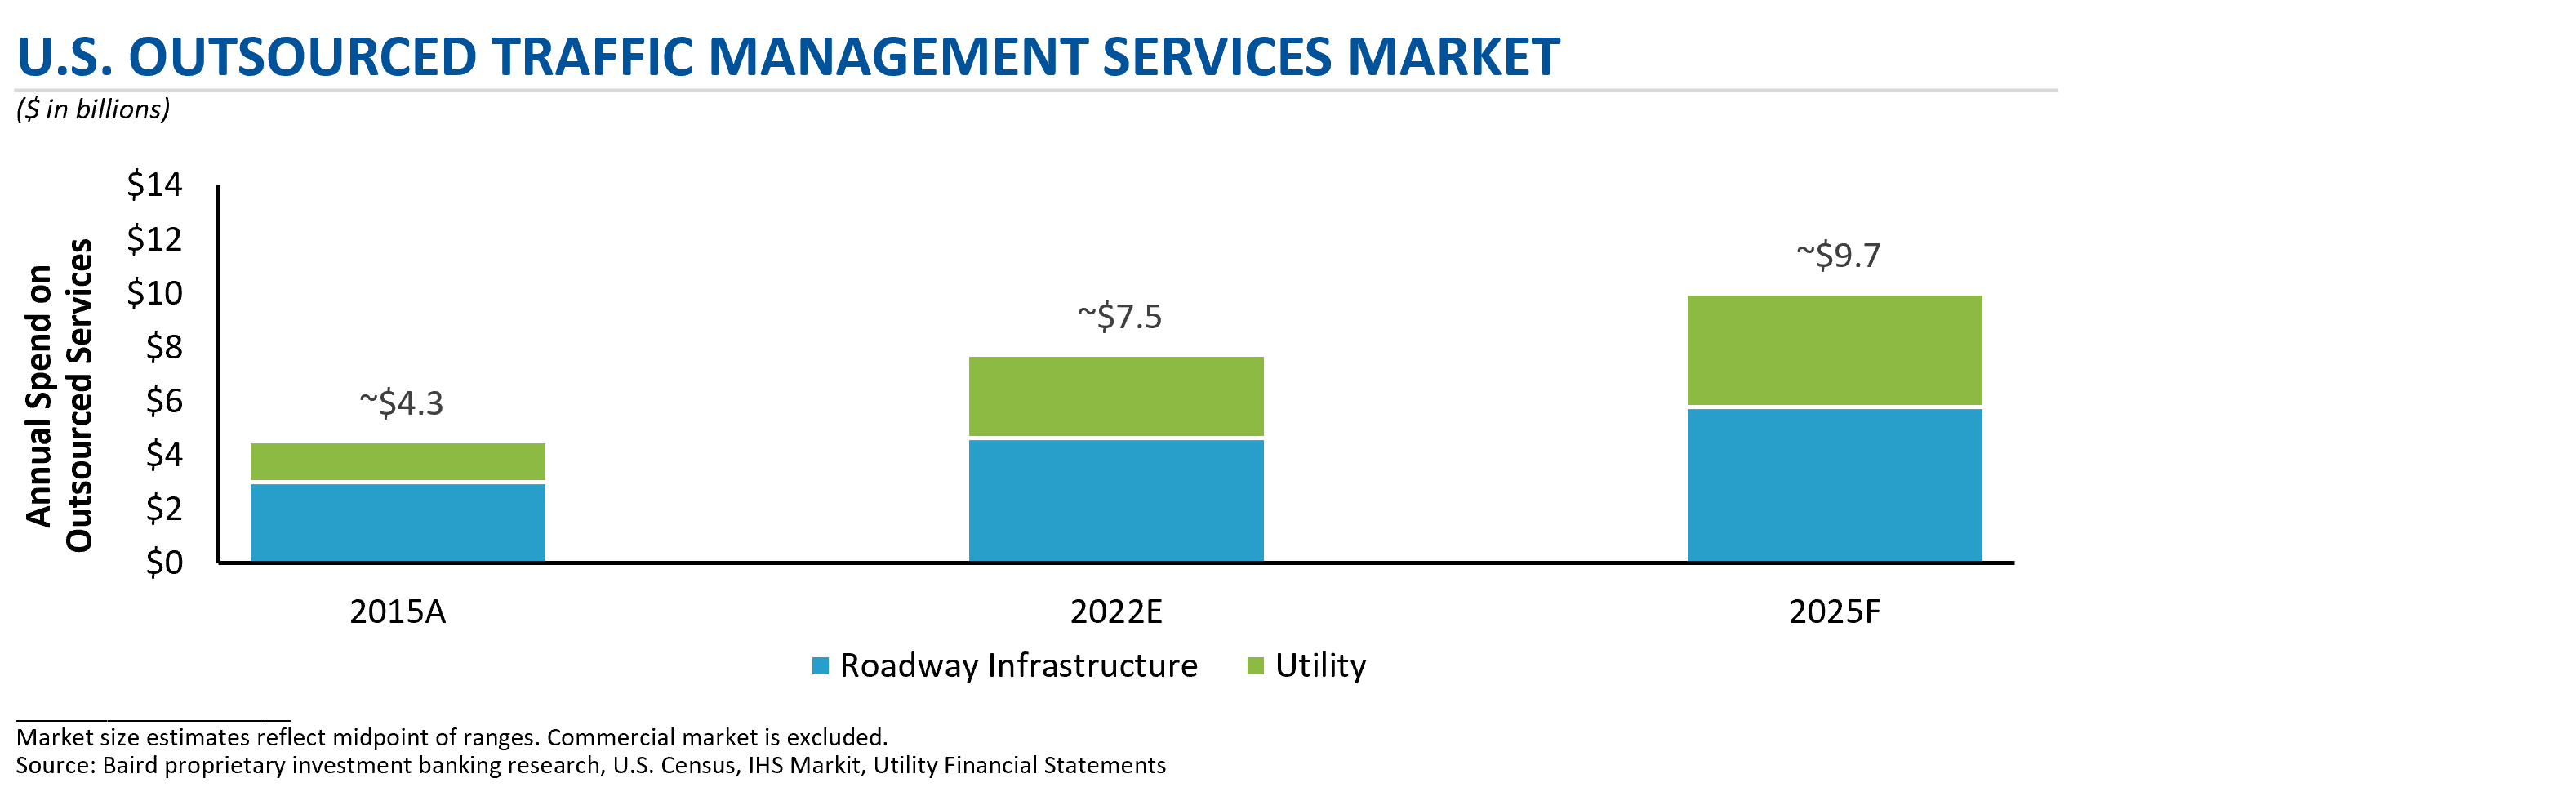 us-outsourced-traffic-management-services_market_Chart.png